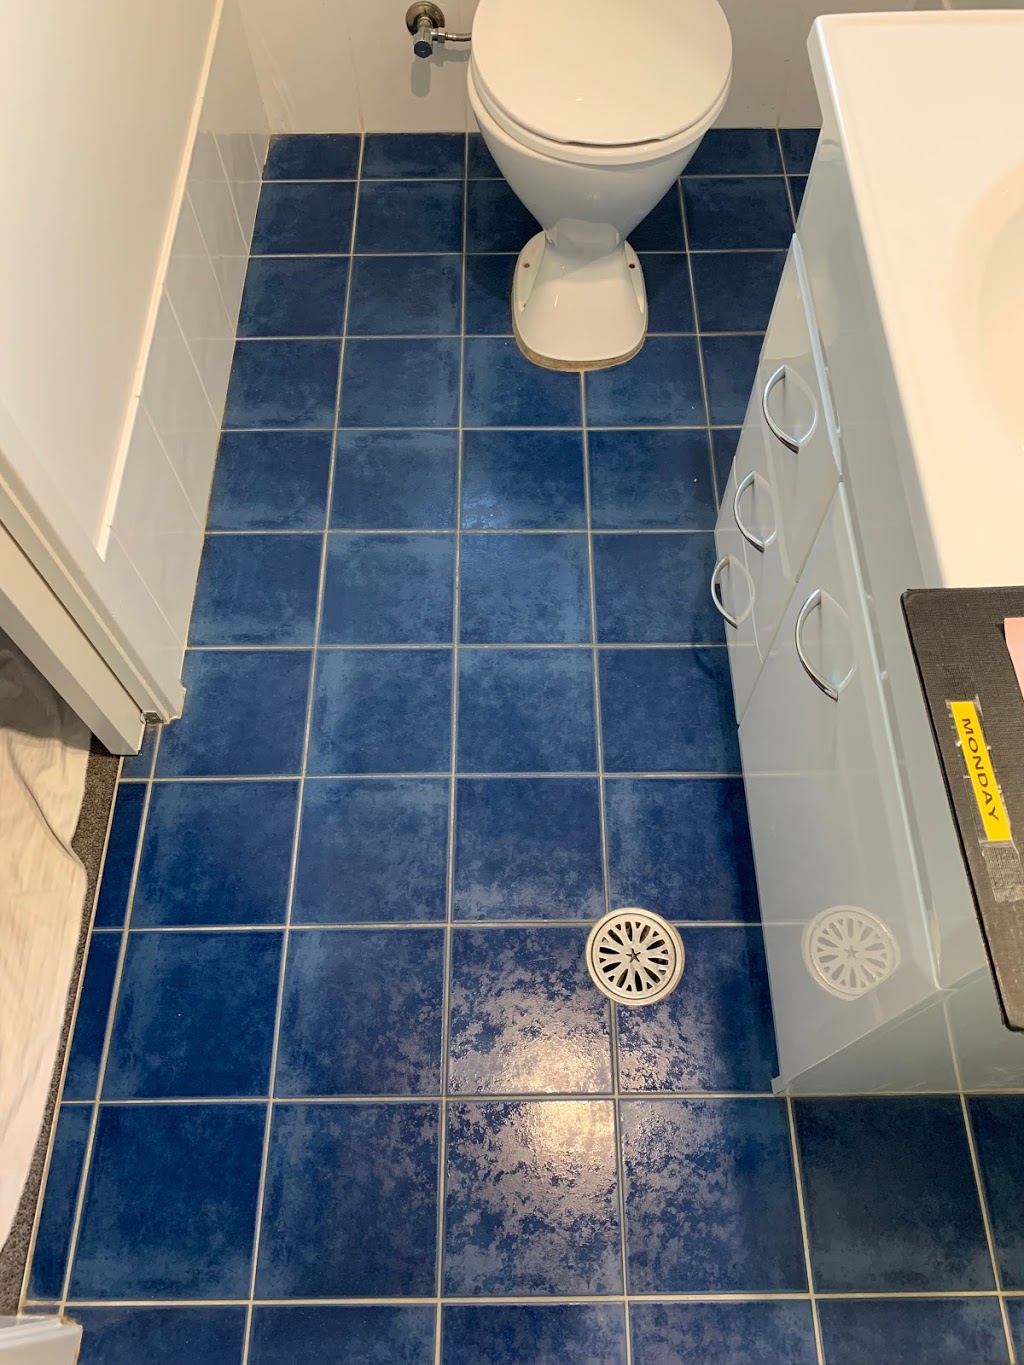 Affordable Regrouting - Regrouting - Tile Cleaning & Tile Repair | home goods store | 15 Kerrylouise Ave, Noraville NSW 2263, Australia | 0425216550 OR +61 425 216 550